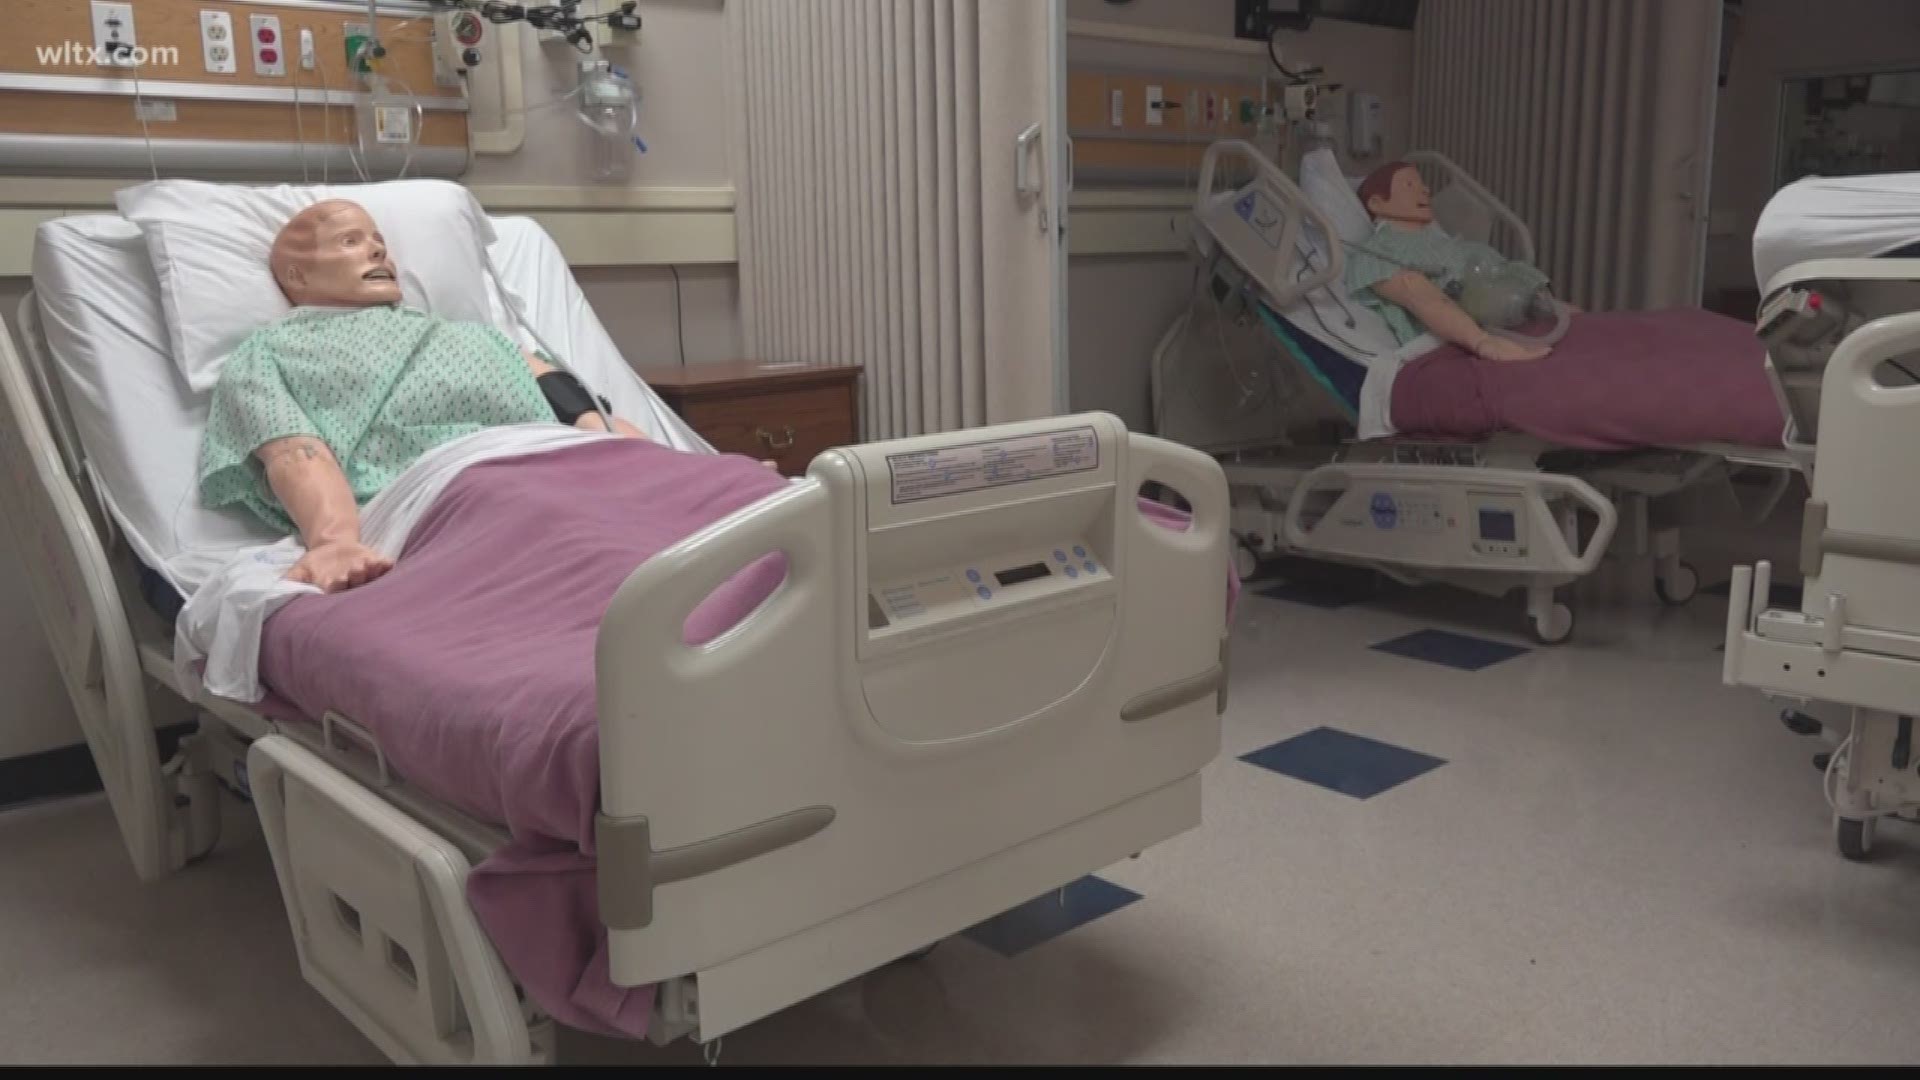 A recent study released by the University of South Carolina College of Nursing is showing signs of hope for the healthcare field in the state.